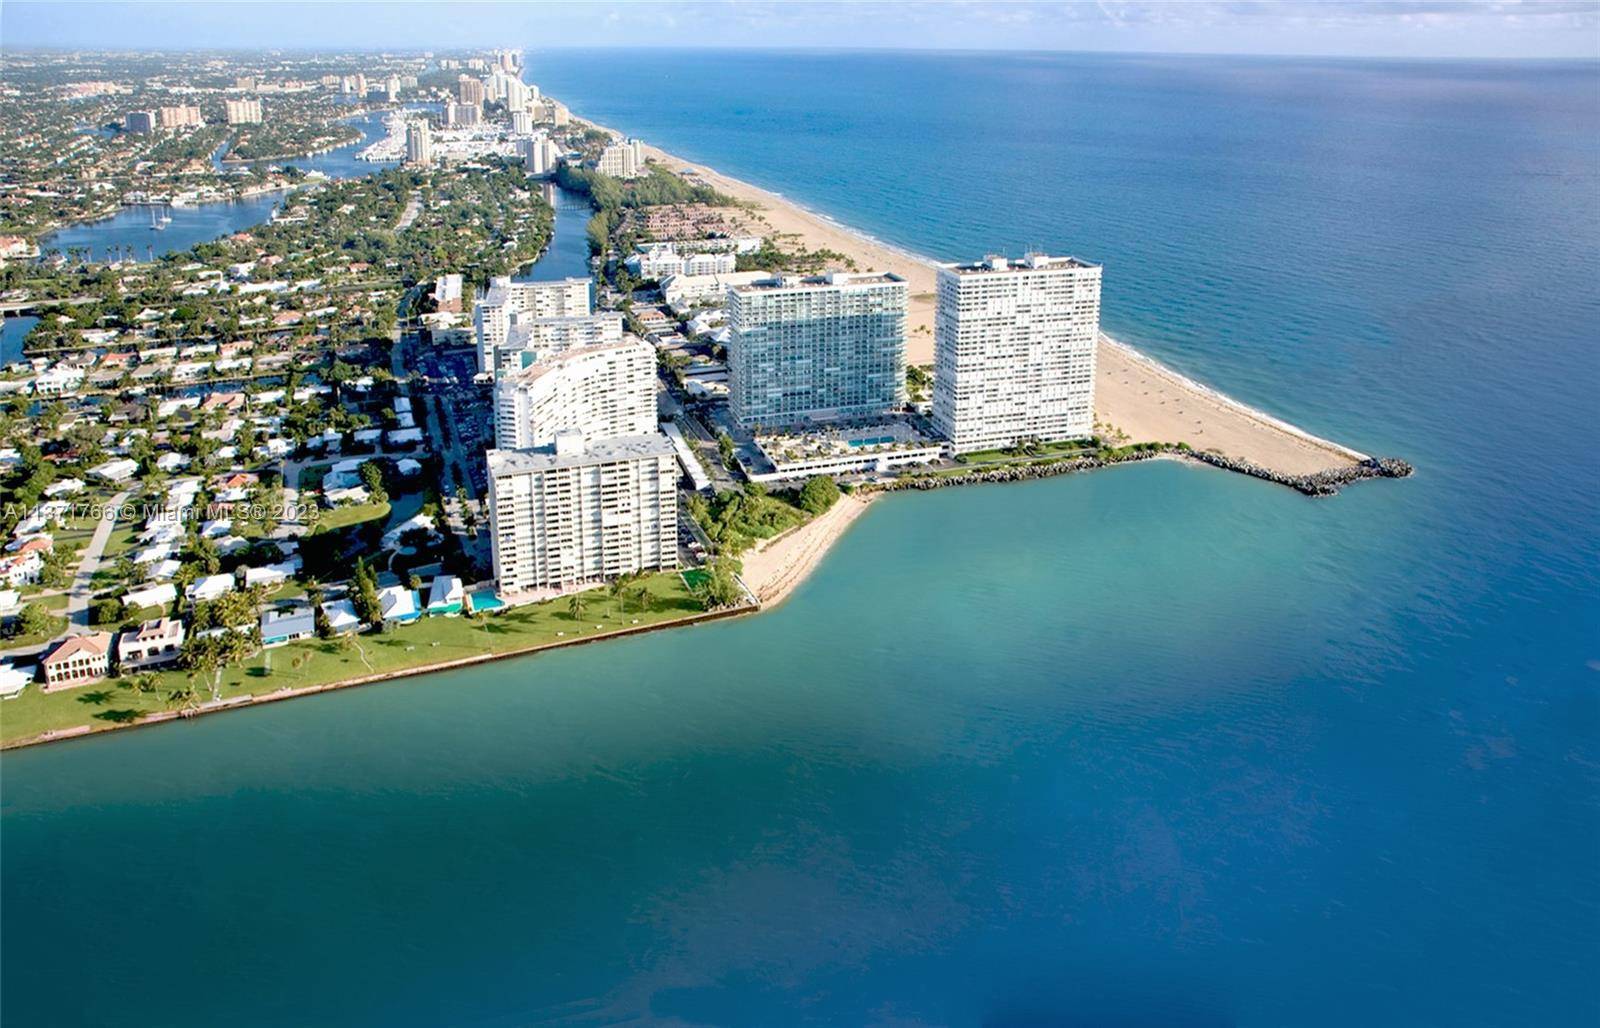 Best value ! Fully renovated and modern designer thru model offers direct inlet and ocean views south to Miami plus ocean and beach views facing north.